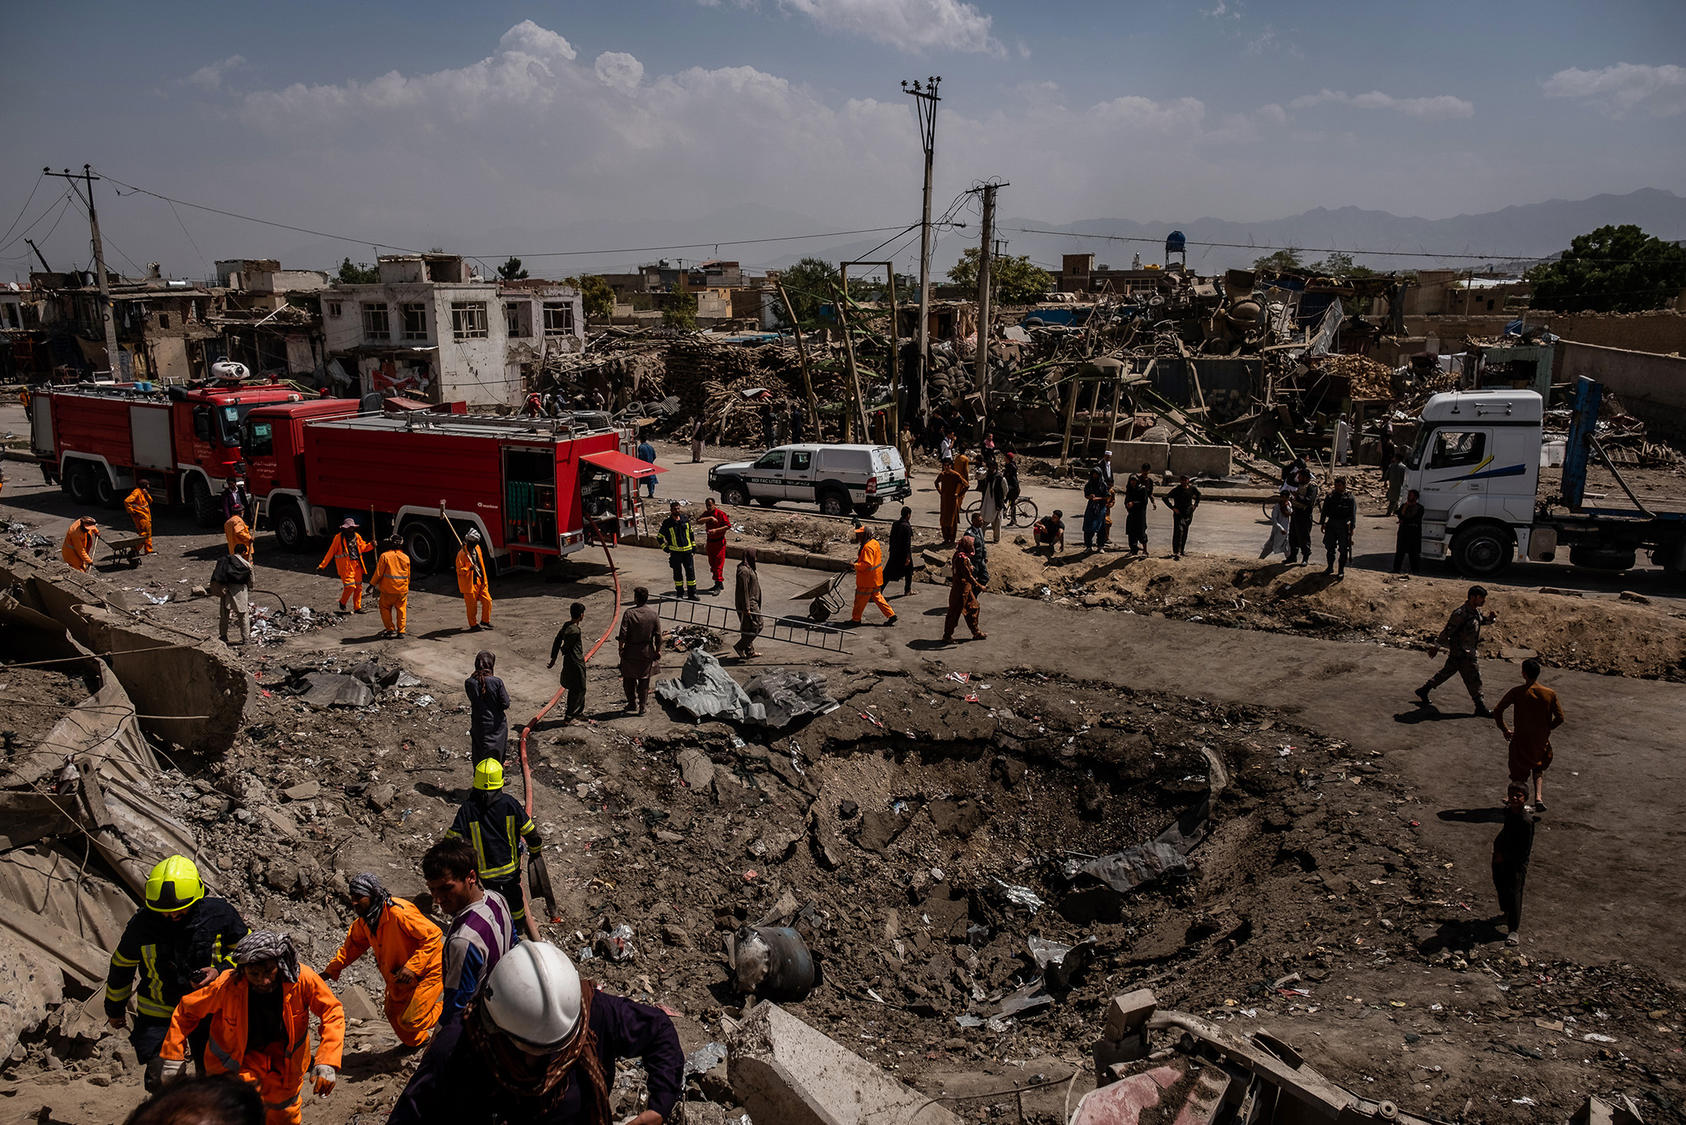 The Taliban claimed responsibility for a car bombing on Sept. 3, 2019, that left a crater in Kabul, Afghanistan. (Jim Huylebroek/The New York Times)